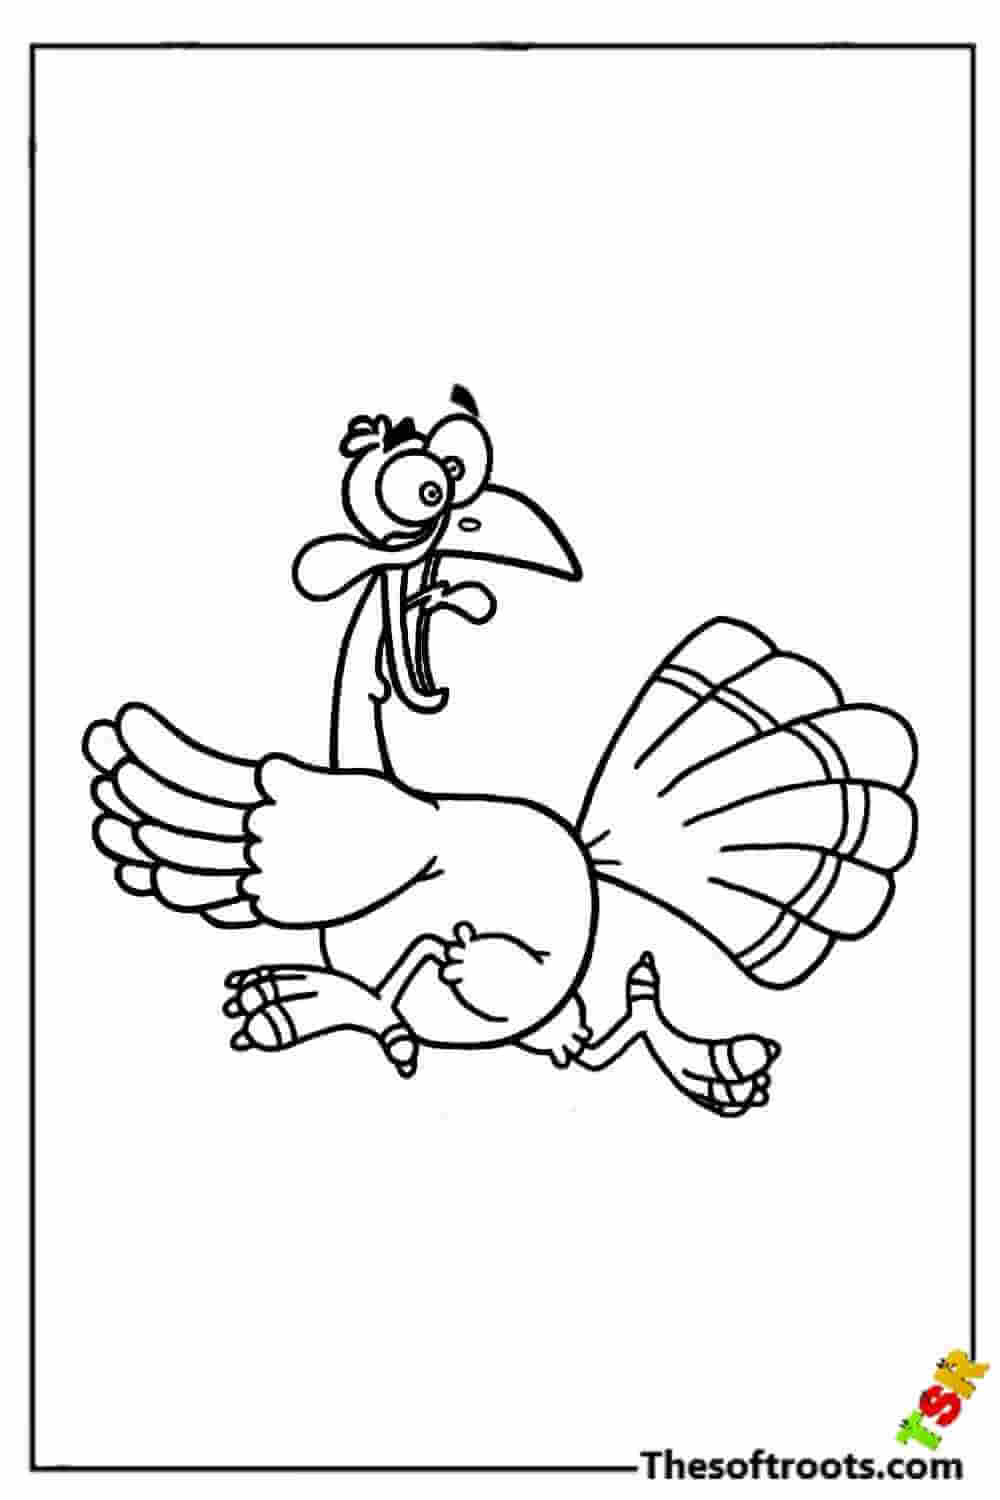 Funny cartoon turkey running away coloring pages